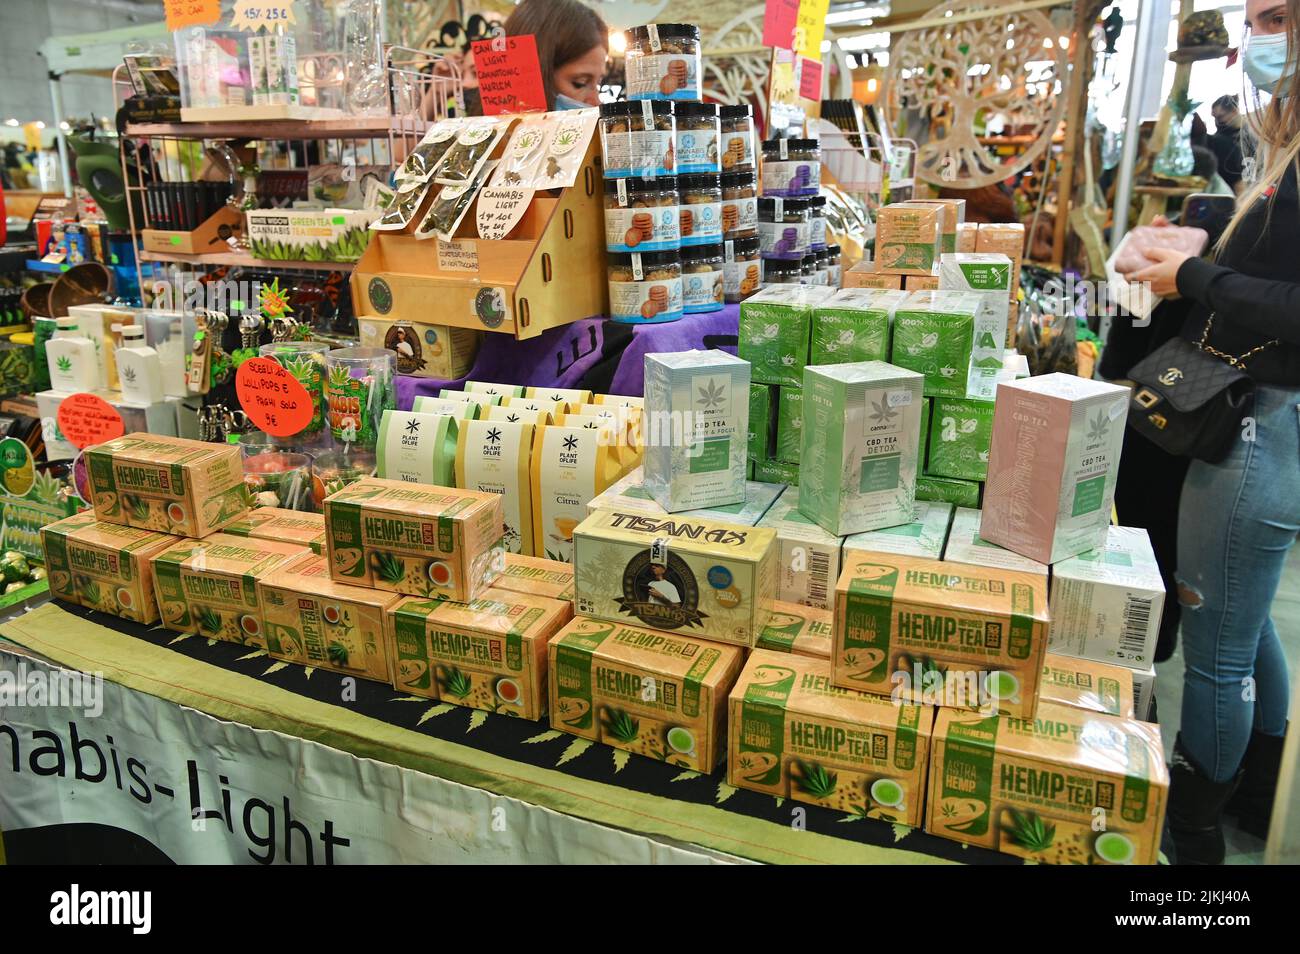 The legal hemp food products on display at Health and wellness fair in Turin, Italy Stock Photo